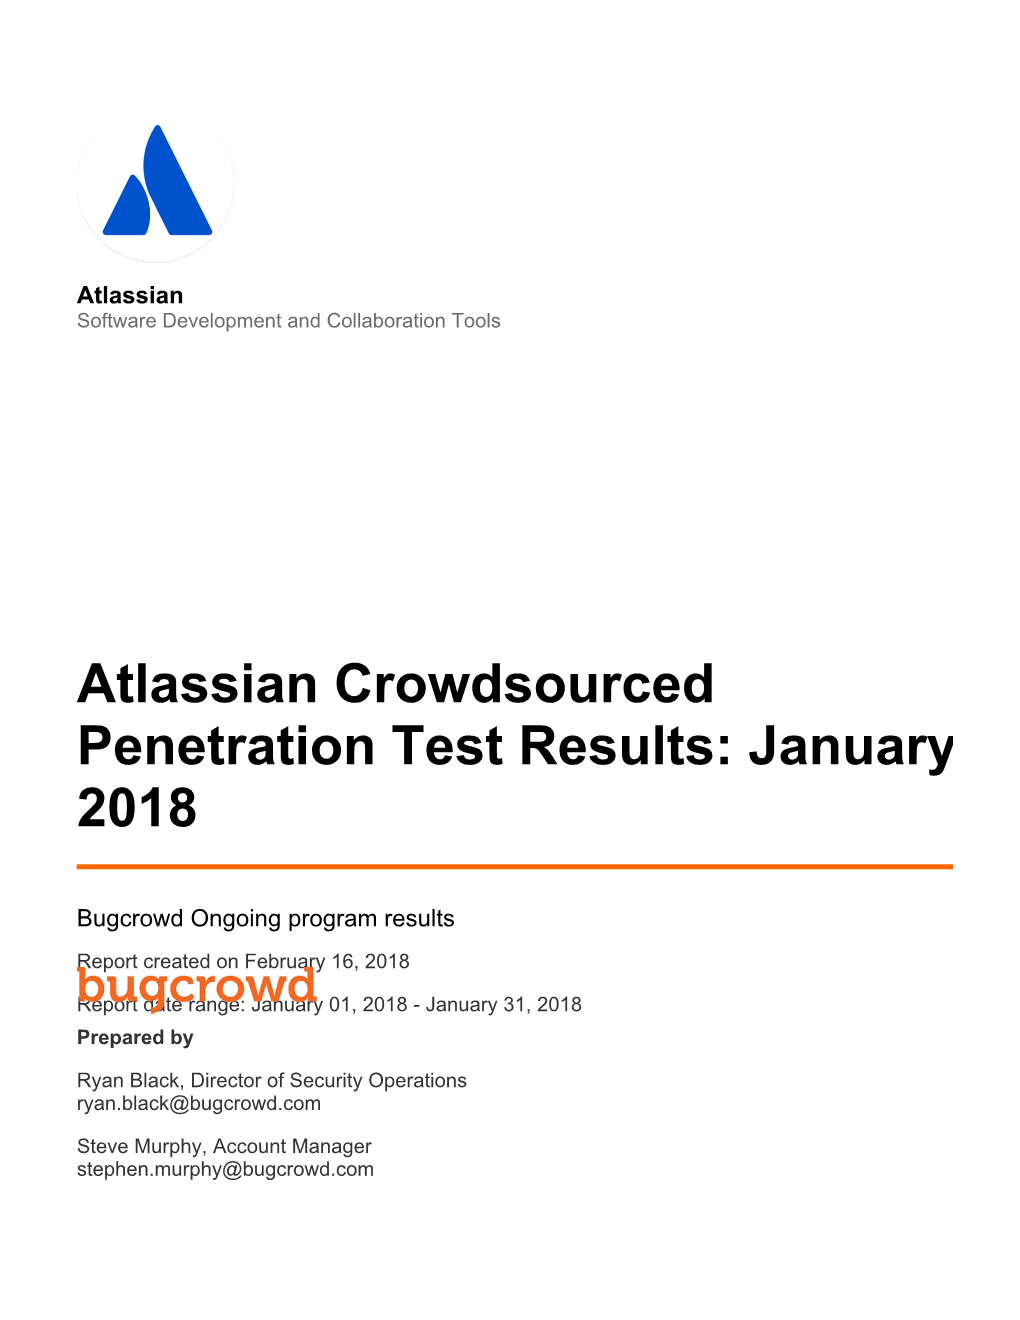 Atlassian Crowdsourced Penetration Test Results: January 2018